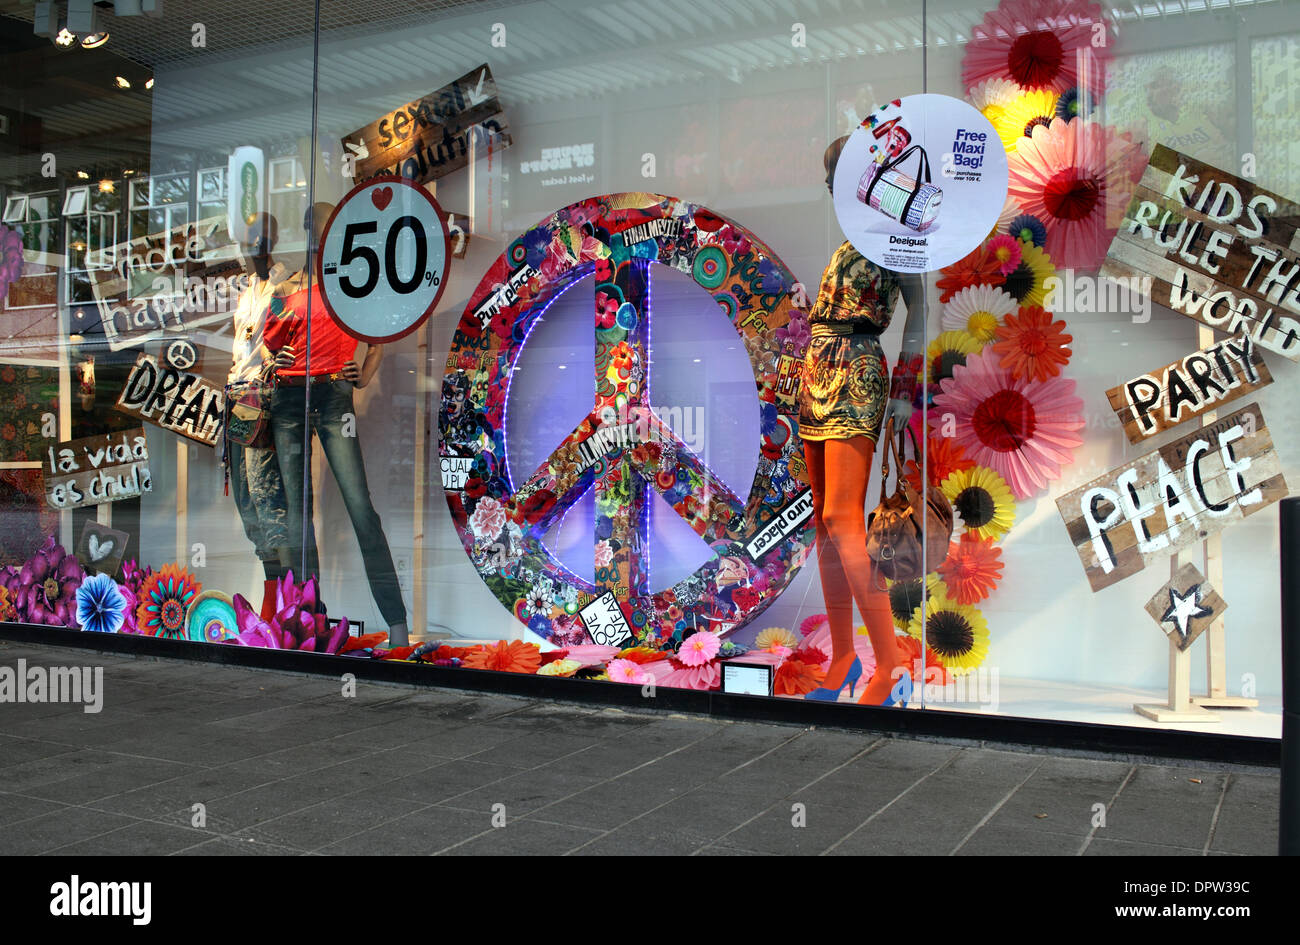 The nuclear disarmament symbol used as part of a fashion display in a Dutch shop window, Lijnbaan, Rotterdam. Stock Photo